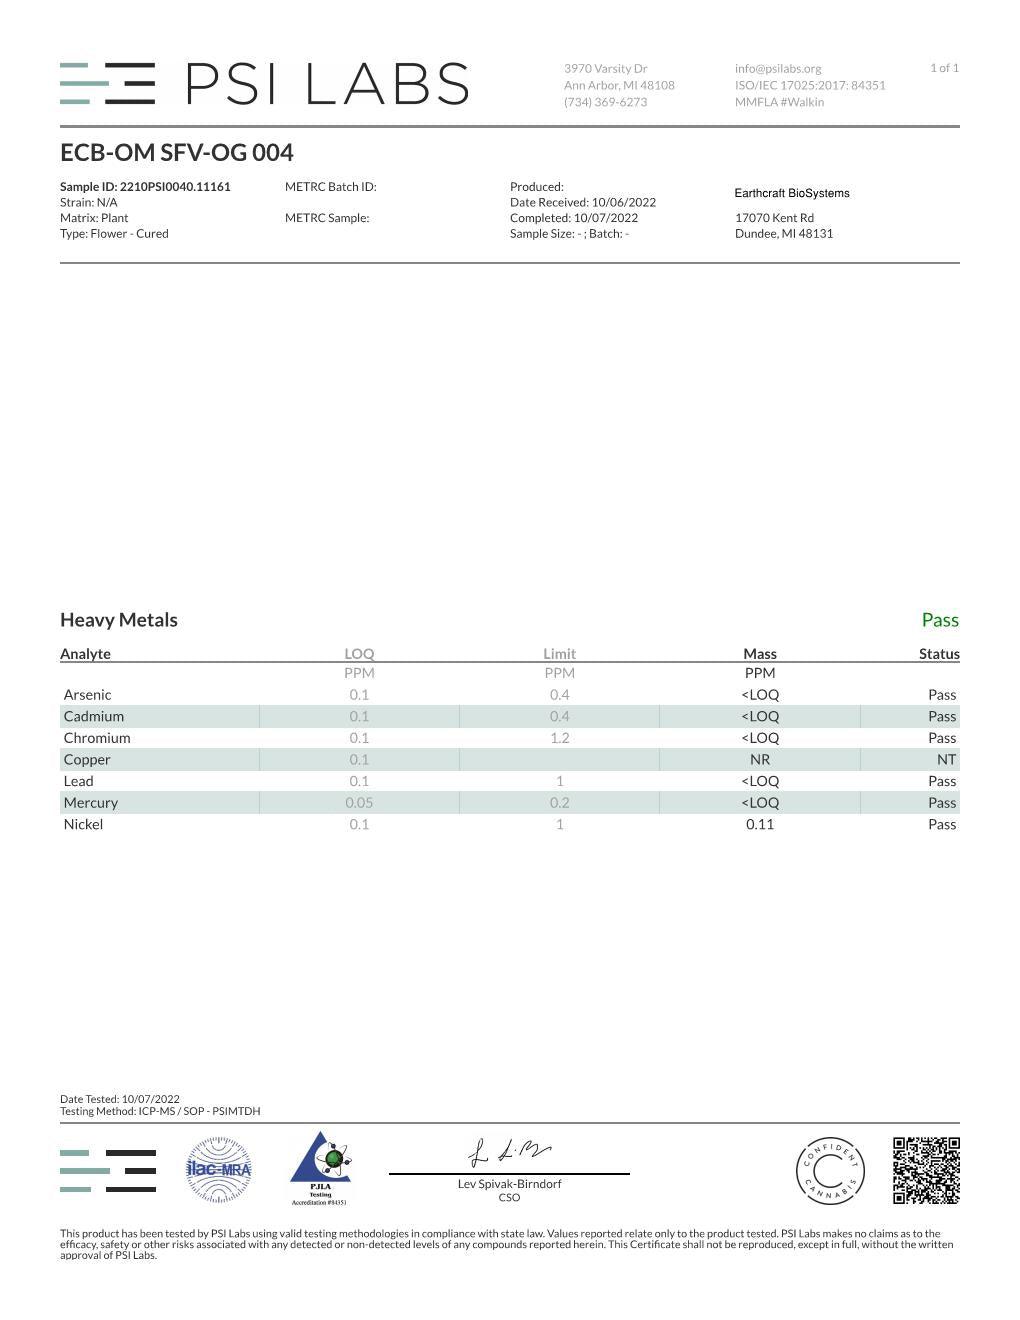 Test Results for Earthcraft Biosystems Organic Nutrients